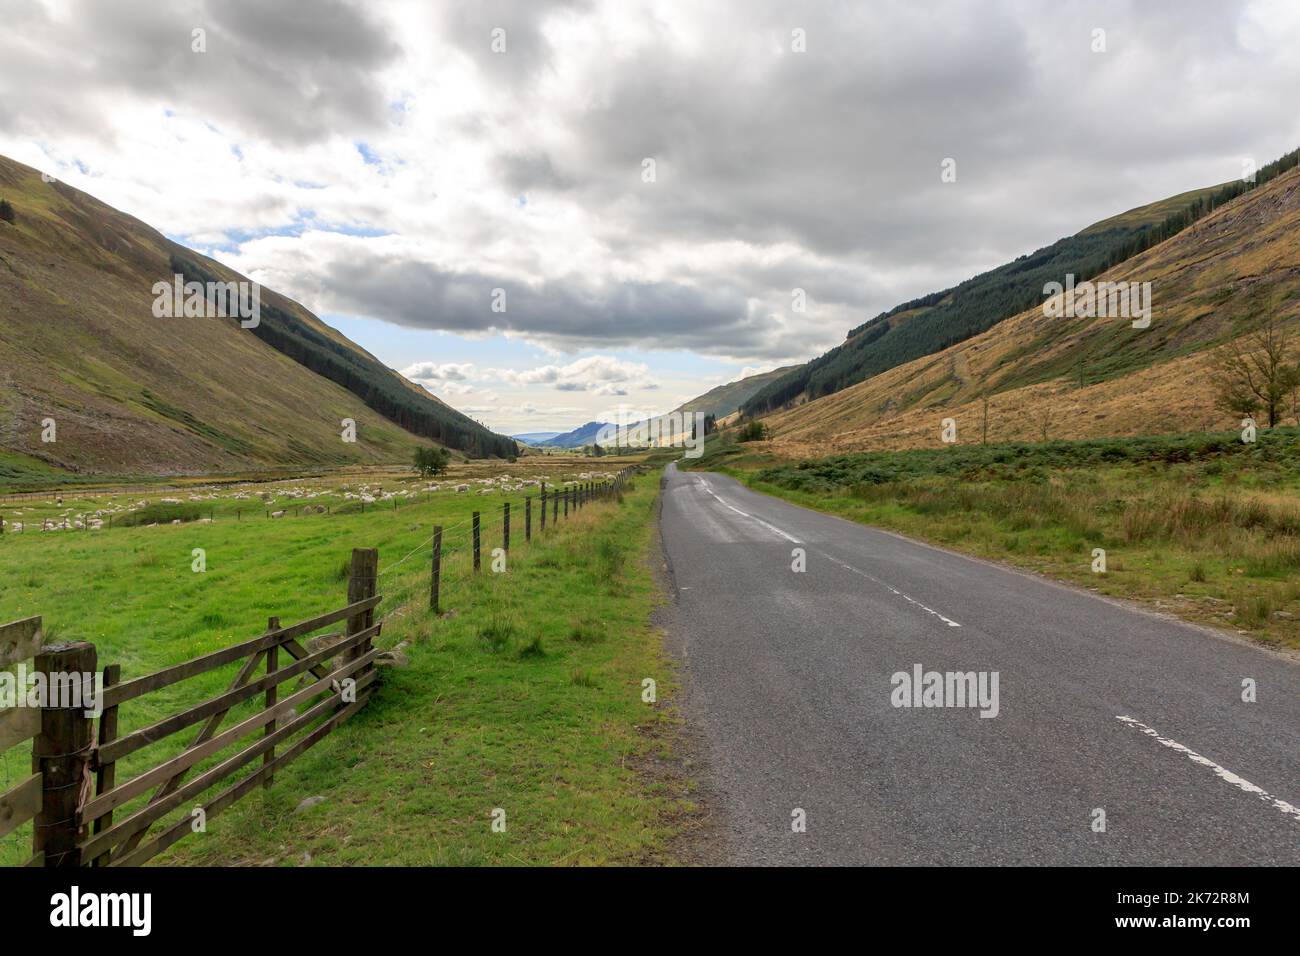 View down the valley on the road Moffat, Scotland Stock Photo